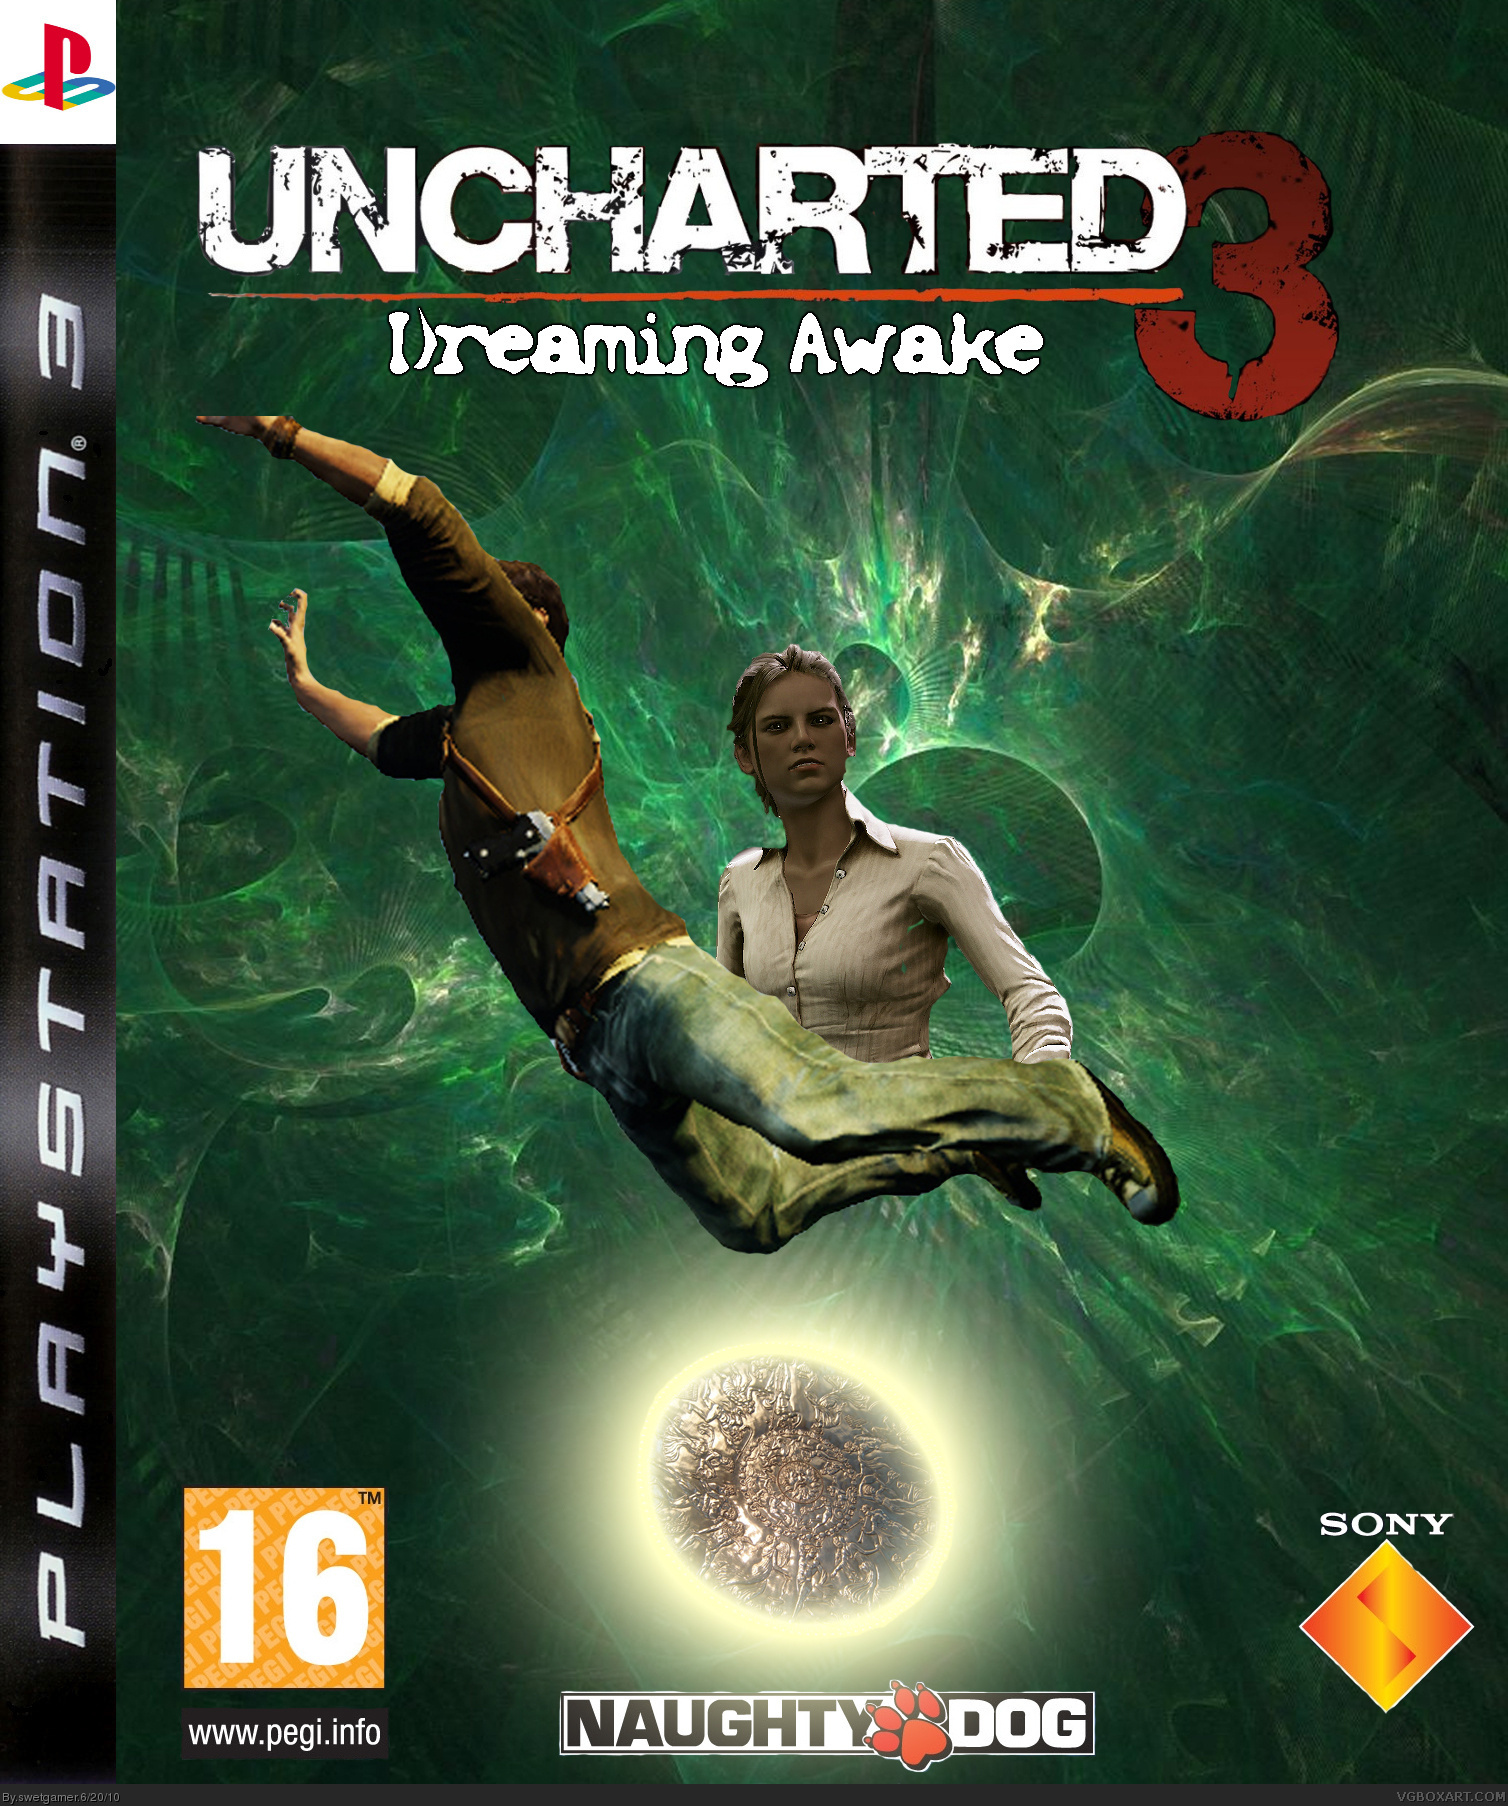 Uncharted 3 box cover